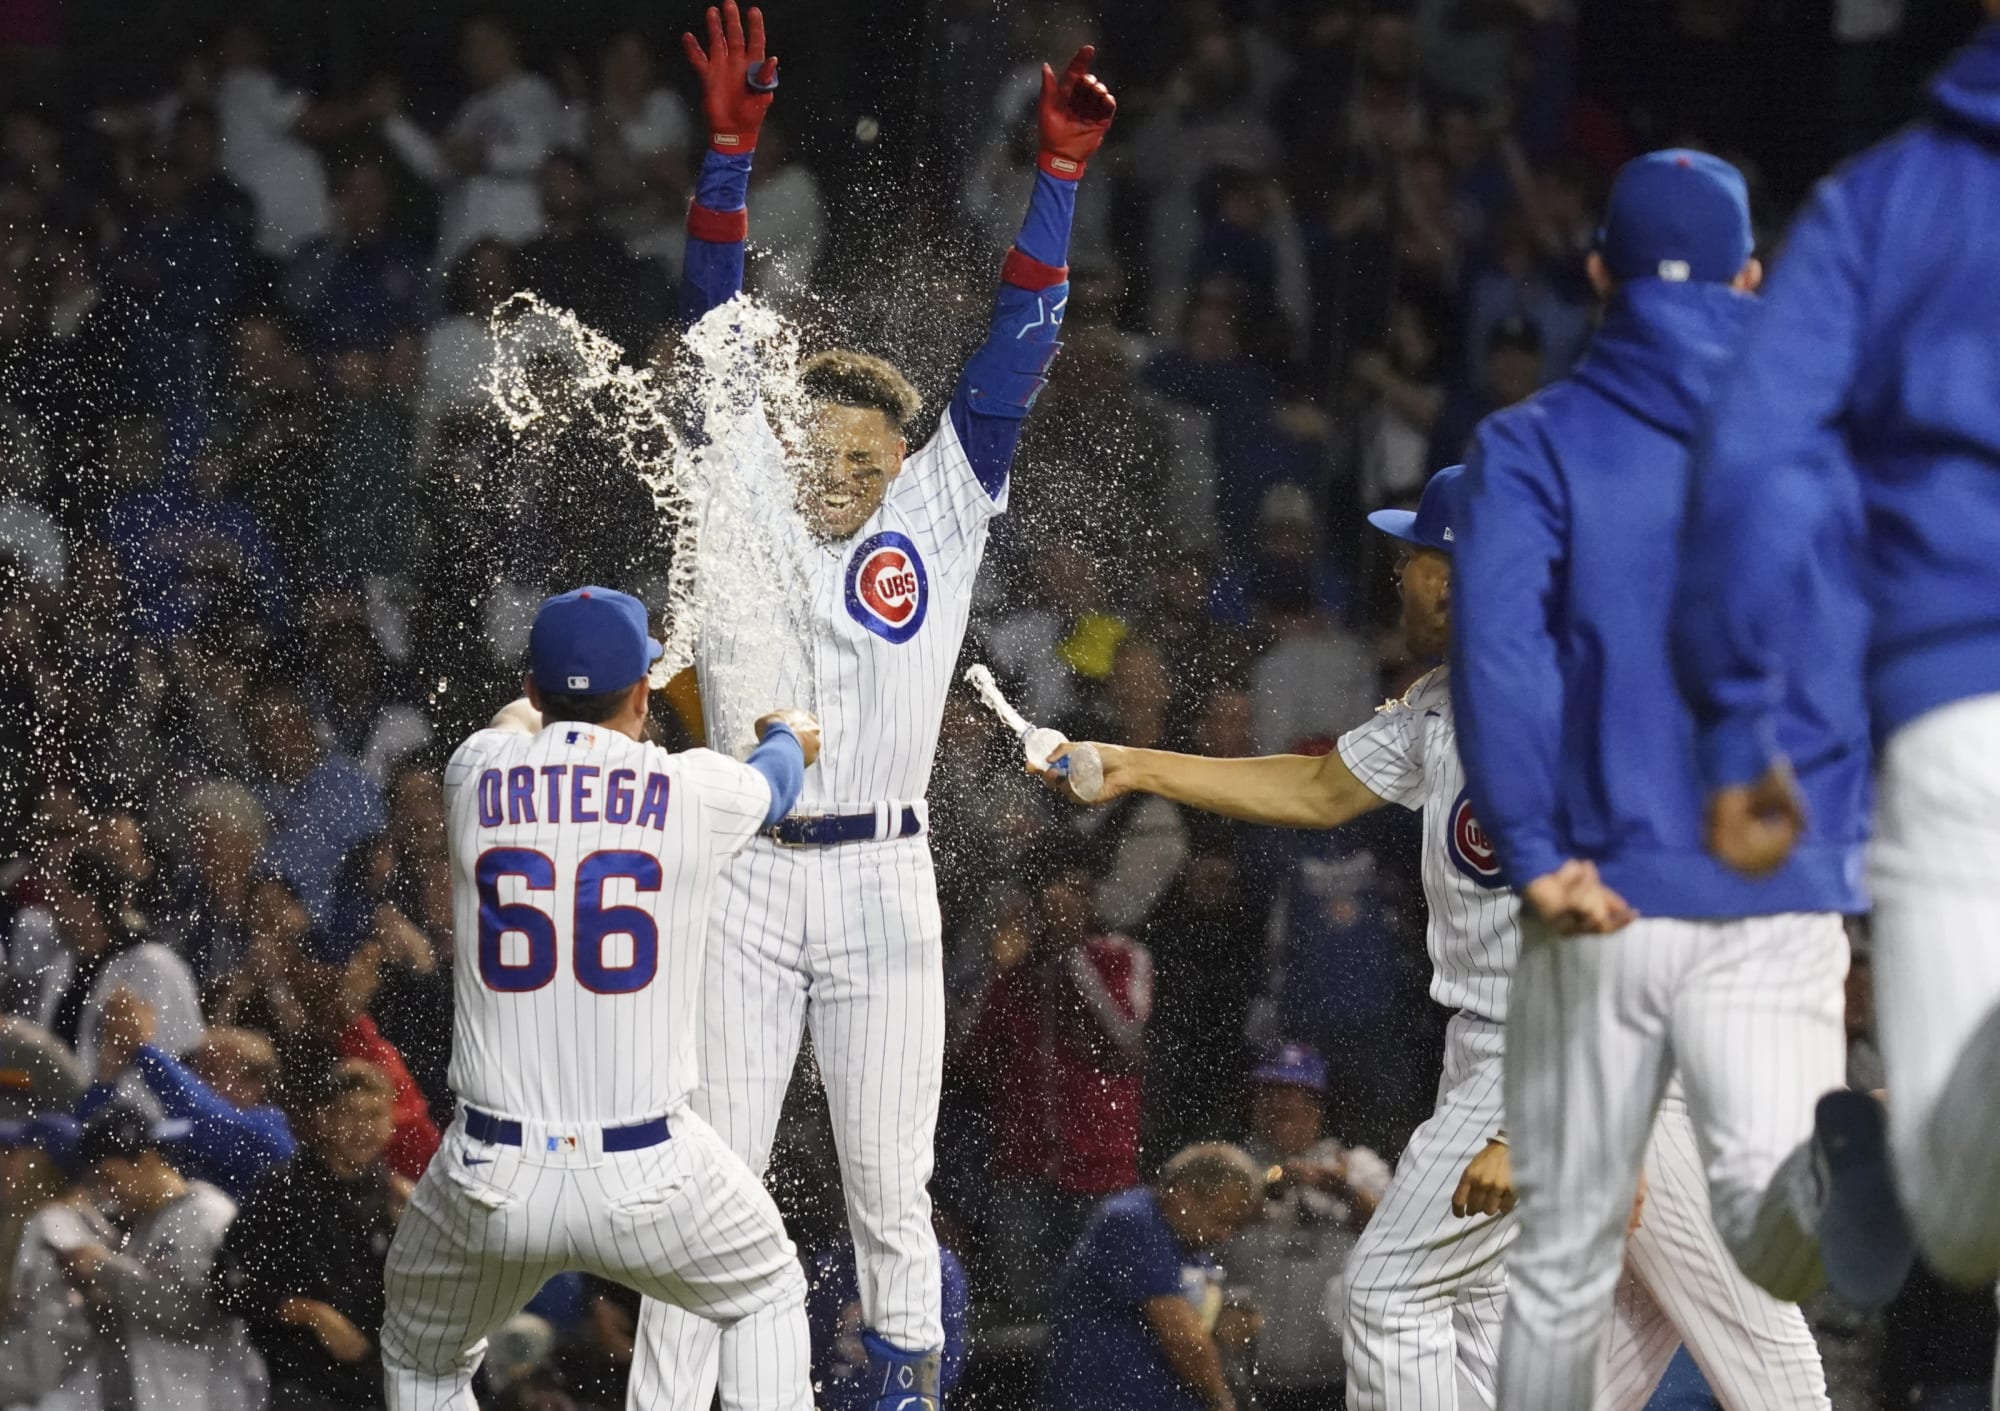 WATCH: Christopher Morel hits walk-off home run, Cubs take down White Sox  4-3 – NBC Sports Chicago